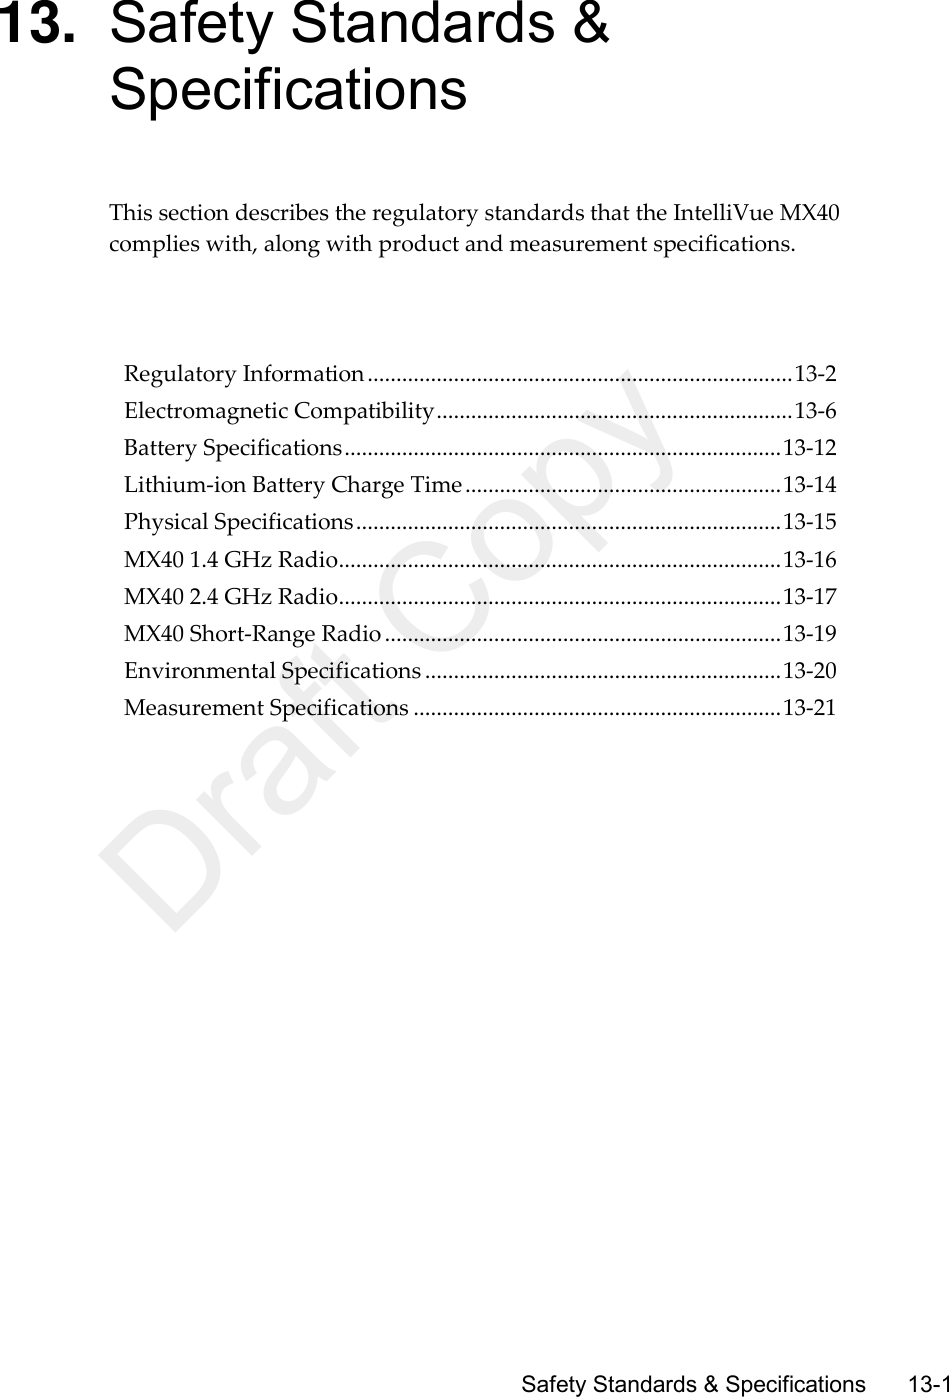      Safety Standards &amp; Specifications       13-1 13. Safety Standards &amp; Specifications This section describes the regulatory standards that the IntelliVue MX40 complies with, along with product and measurement specifications.      Regulatory Information .......................................................................... 13-2 Electromagnetic Compatibility .............................................................. 13-6 Battery Specifications ............................................................................ 13-12 Lithium-ion Battery Charge Time ....................................................... 13-14 Physical Specifications .......................................................................... 13-15 MX40 1.4 GHz Radio ............................................................................. 13-16 MX40 2.4 GHz Radio ............................................................................. 13-17 MX40 Short-Range Radio ..................................................................... 13-19 Environmental Specifications .............................................................. 13-20 Measurement Specifications ................................................................ 13-21   Draft Copy